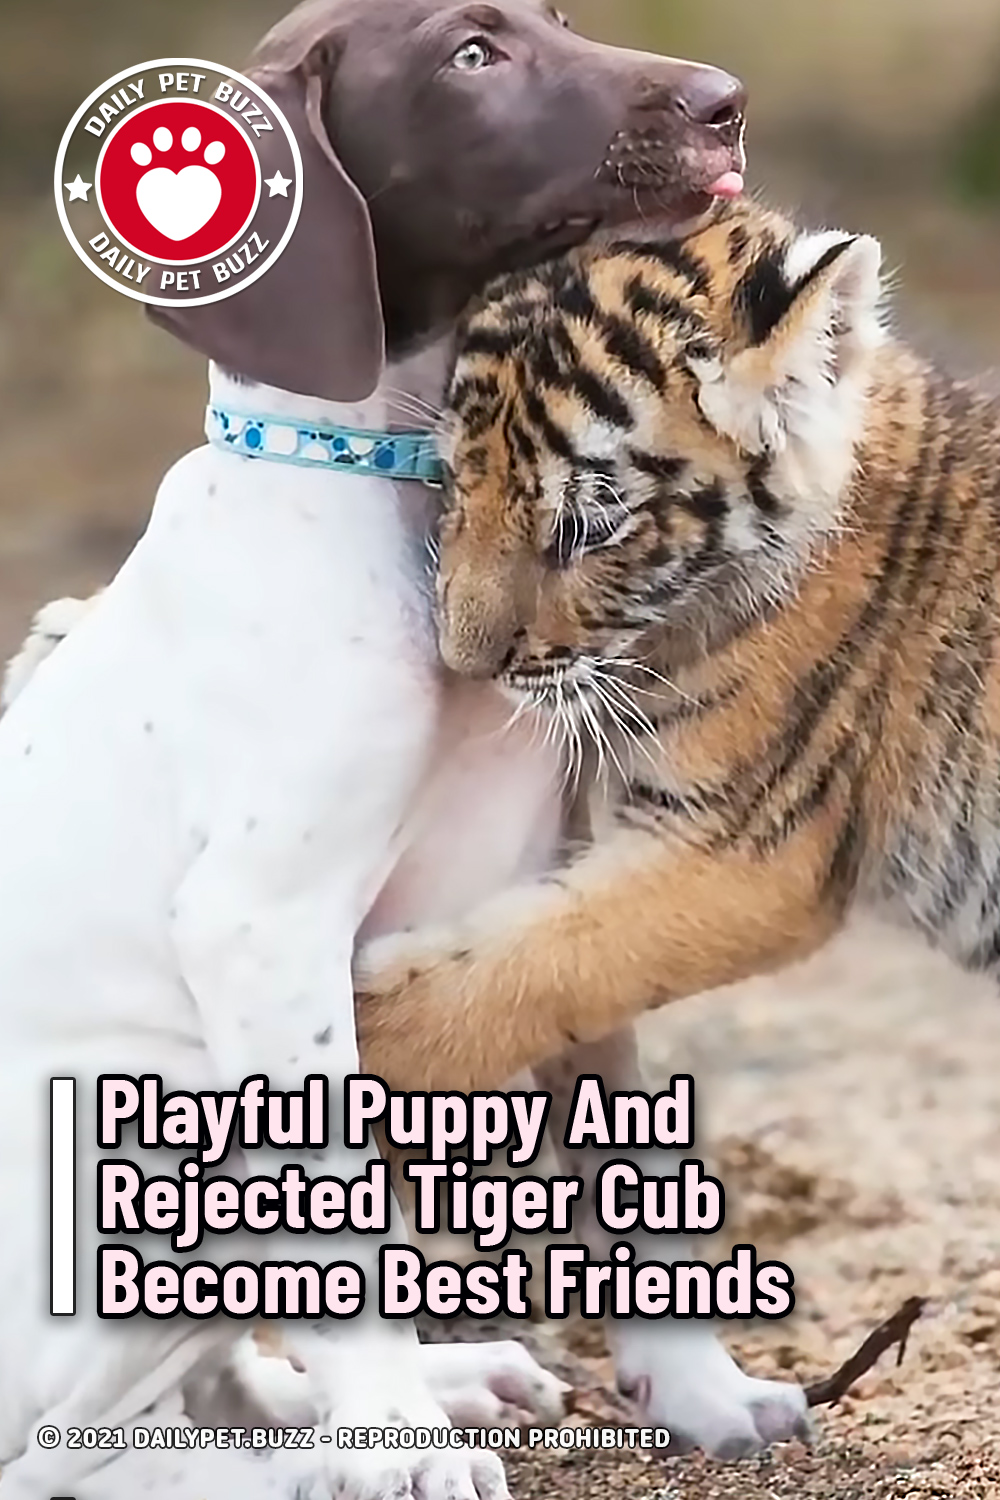 Playful Puppy And Rejected Tiger Cub Become Best Friends